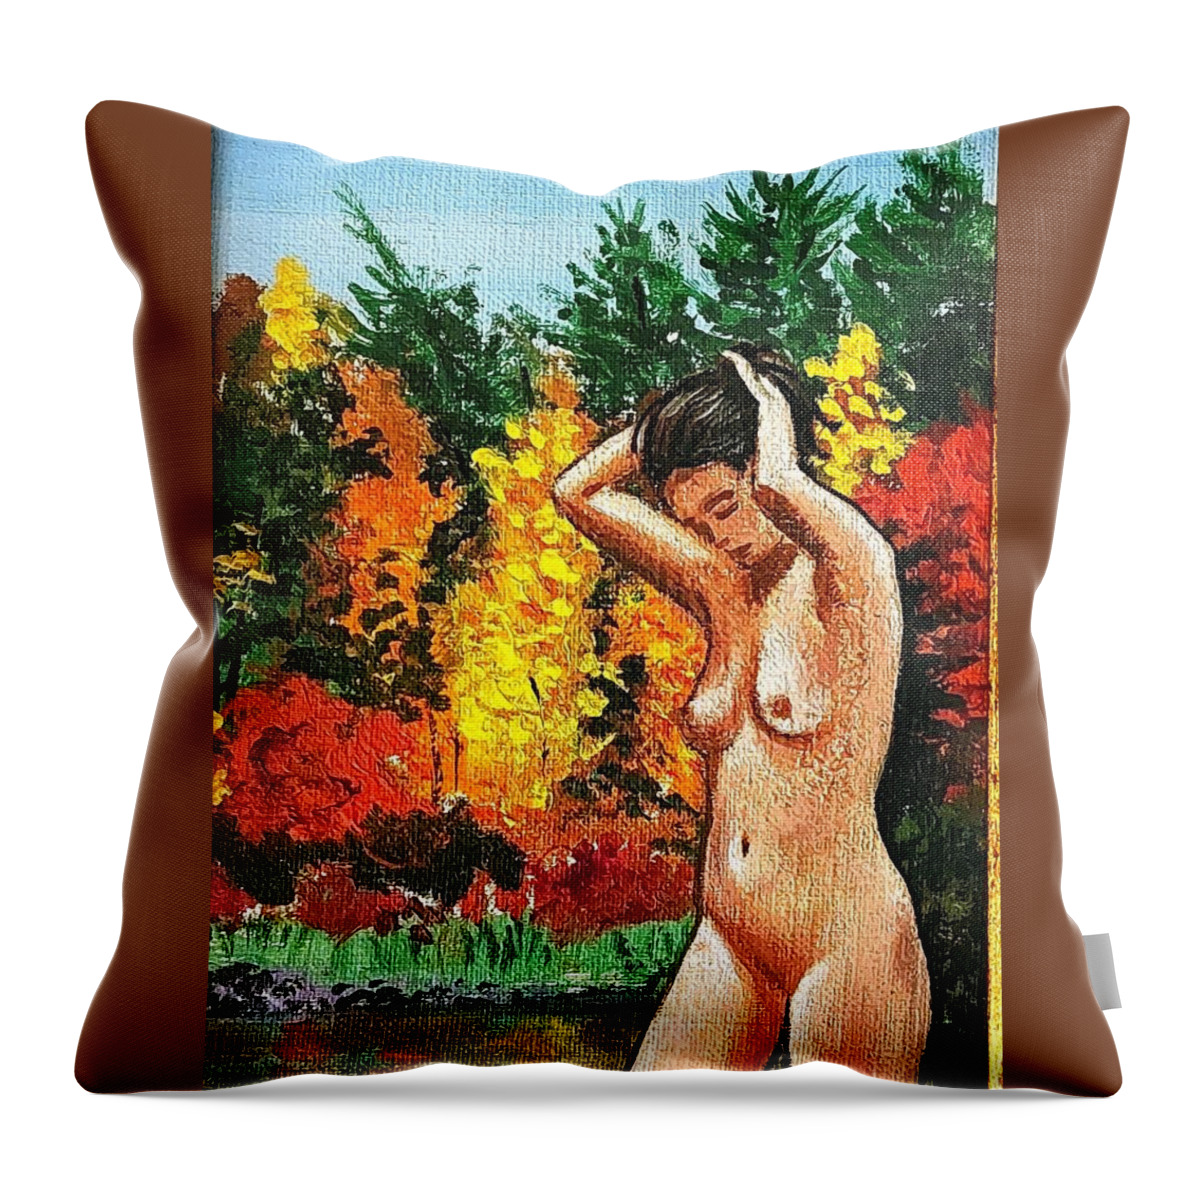  Throw Pillow featuring the painting Skinny Dipping in Walden pond by James RODERICK